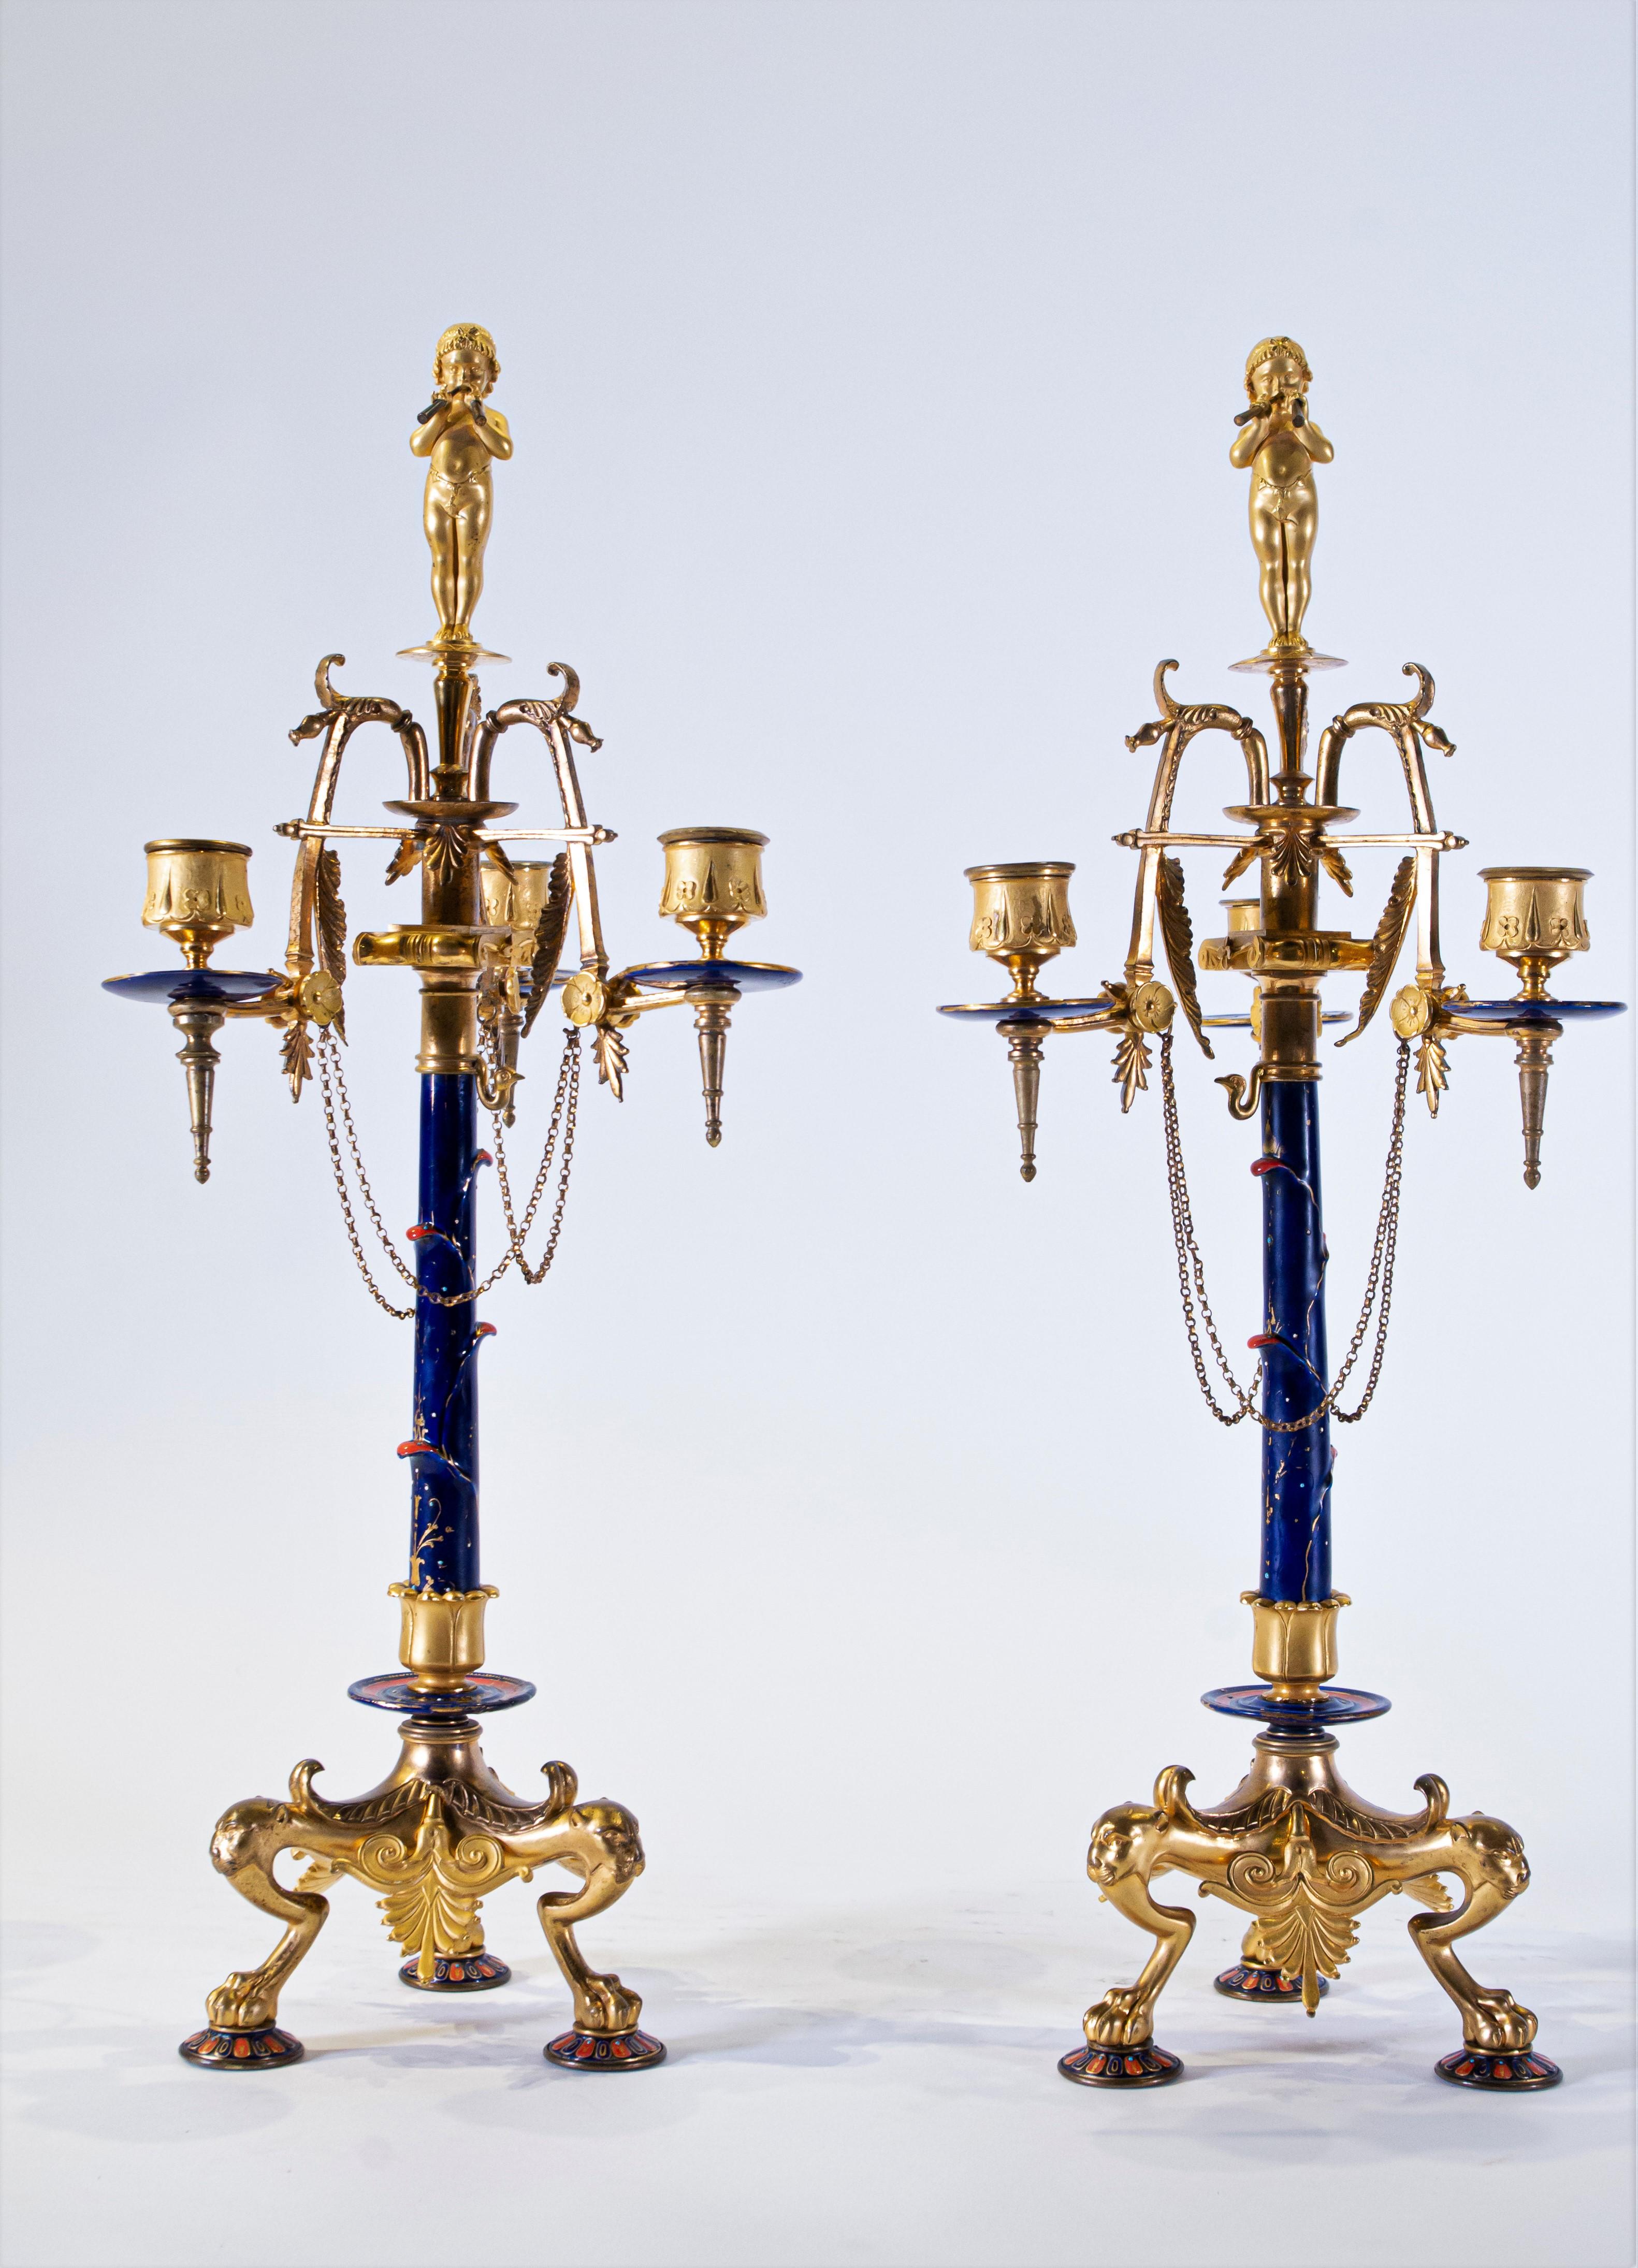 A gorgeous and highly unique pair of 19th century French Neo-Grec style three-arm doré bronze and enamel candelabras, Attributed to Ferdinand Levillain, Stamped L C. Each candelabra is beautifully cast, hand-chassed and hand-chiseled with